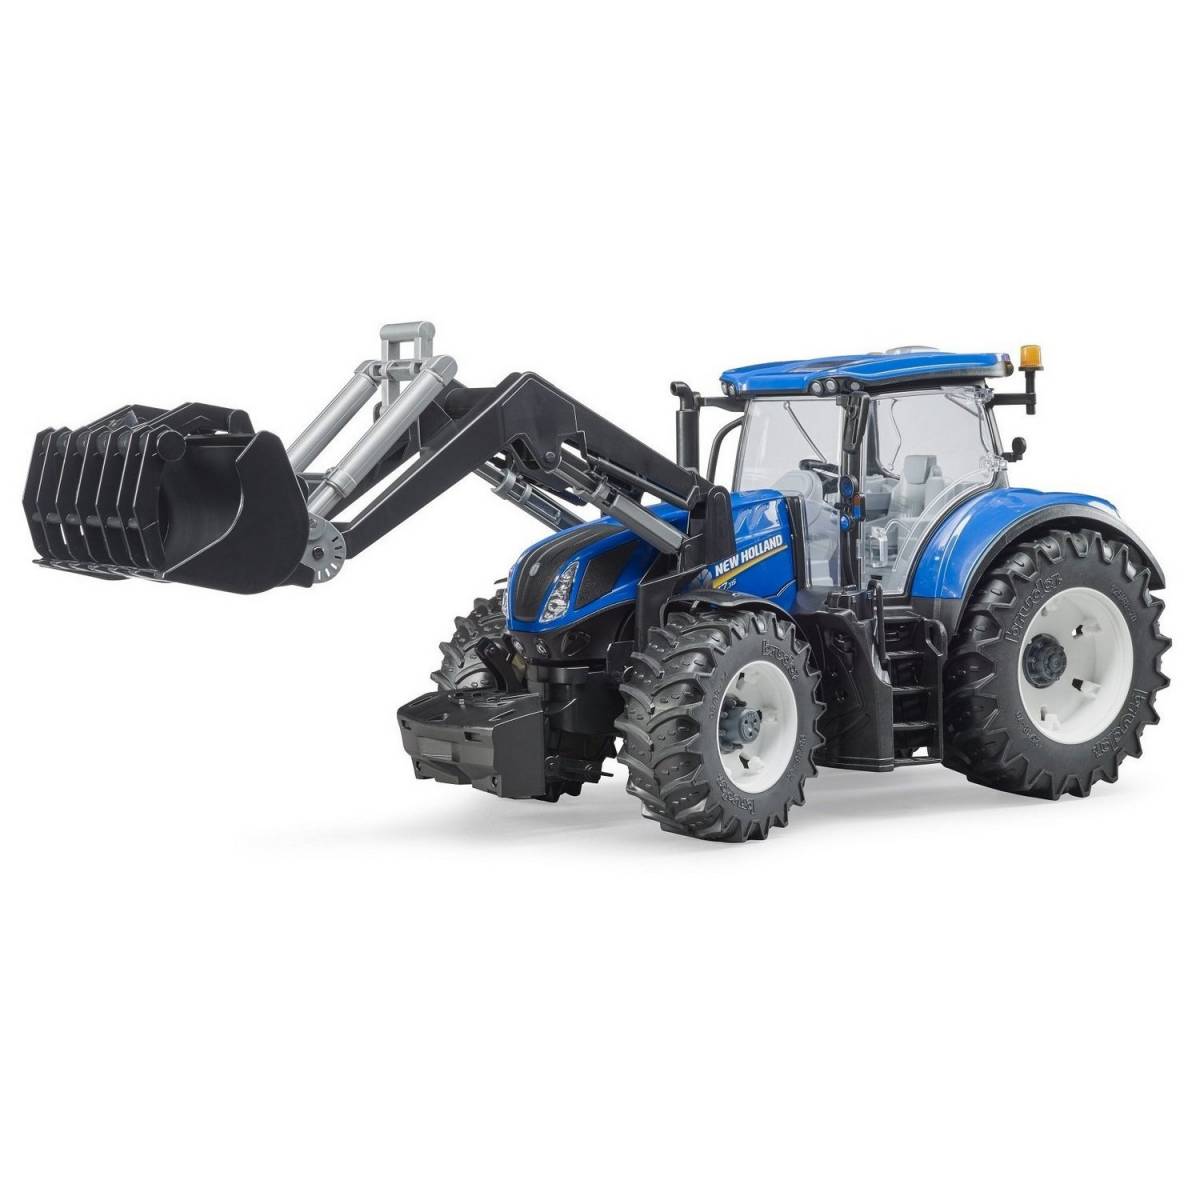 Tractor New Holland T7.315 cu incarcator frontal 03121 Bruder